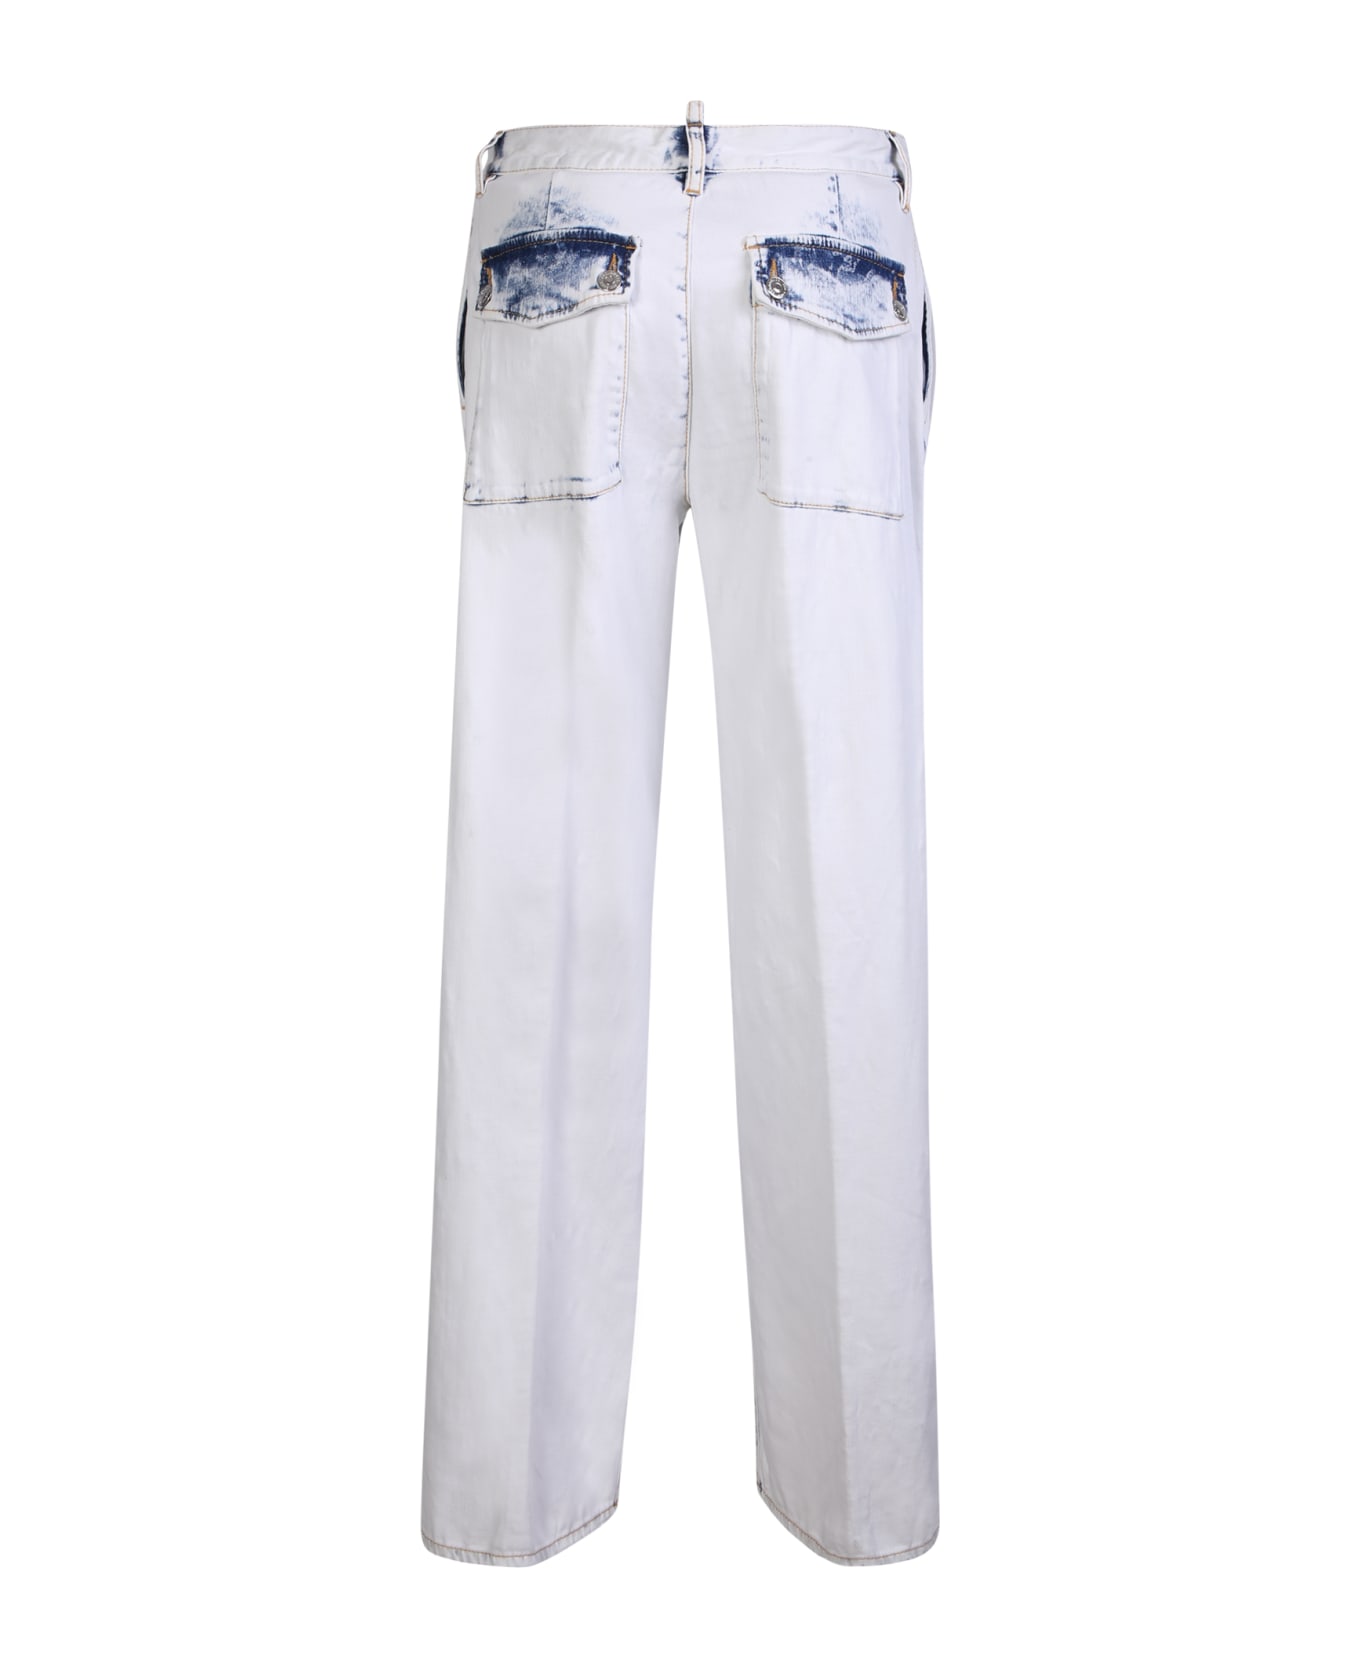 Dsquared2 Faded High Waist Jeans - Blue ボトムス